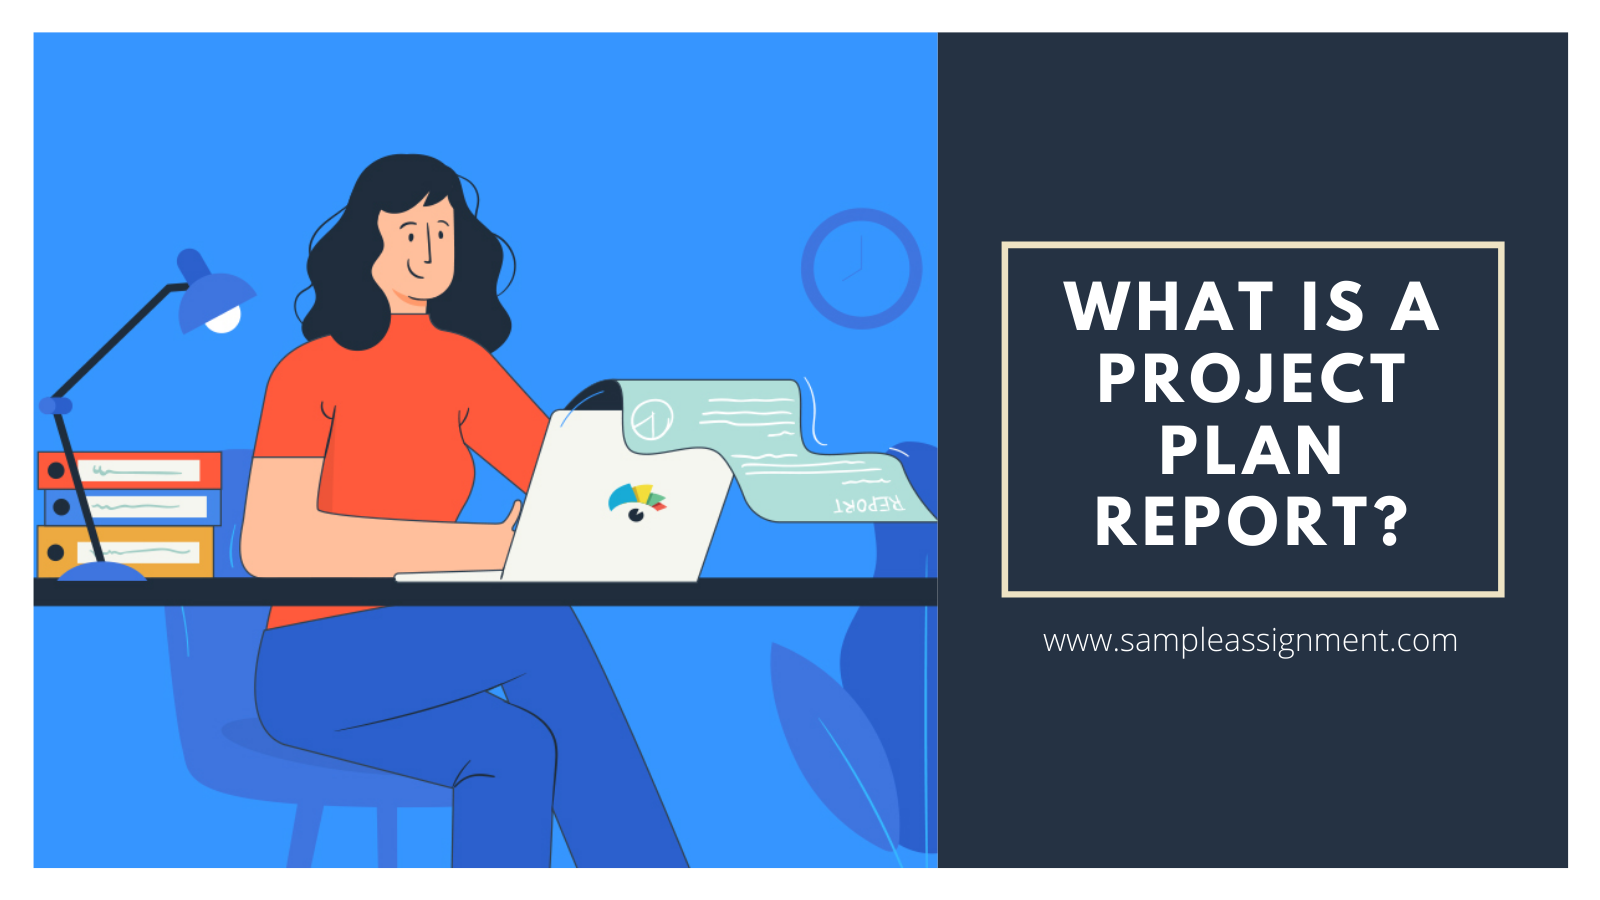 What is a Project Plan Report?